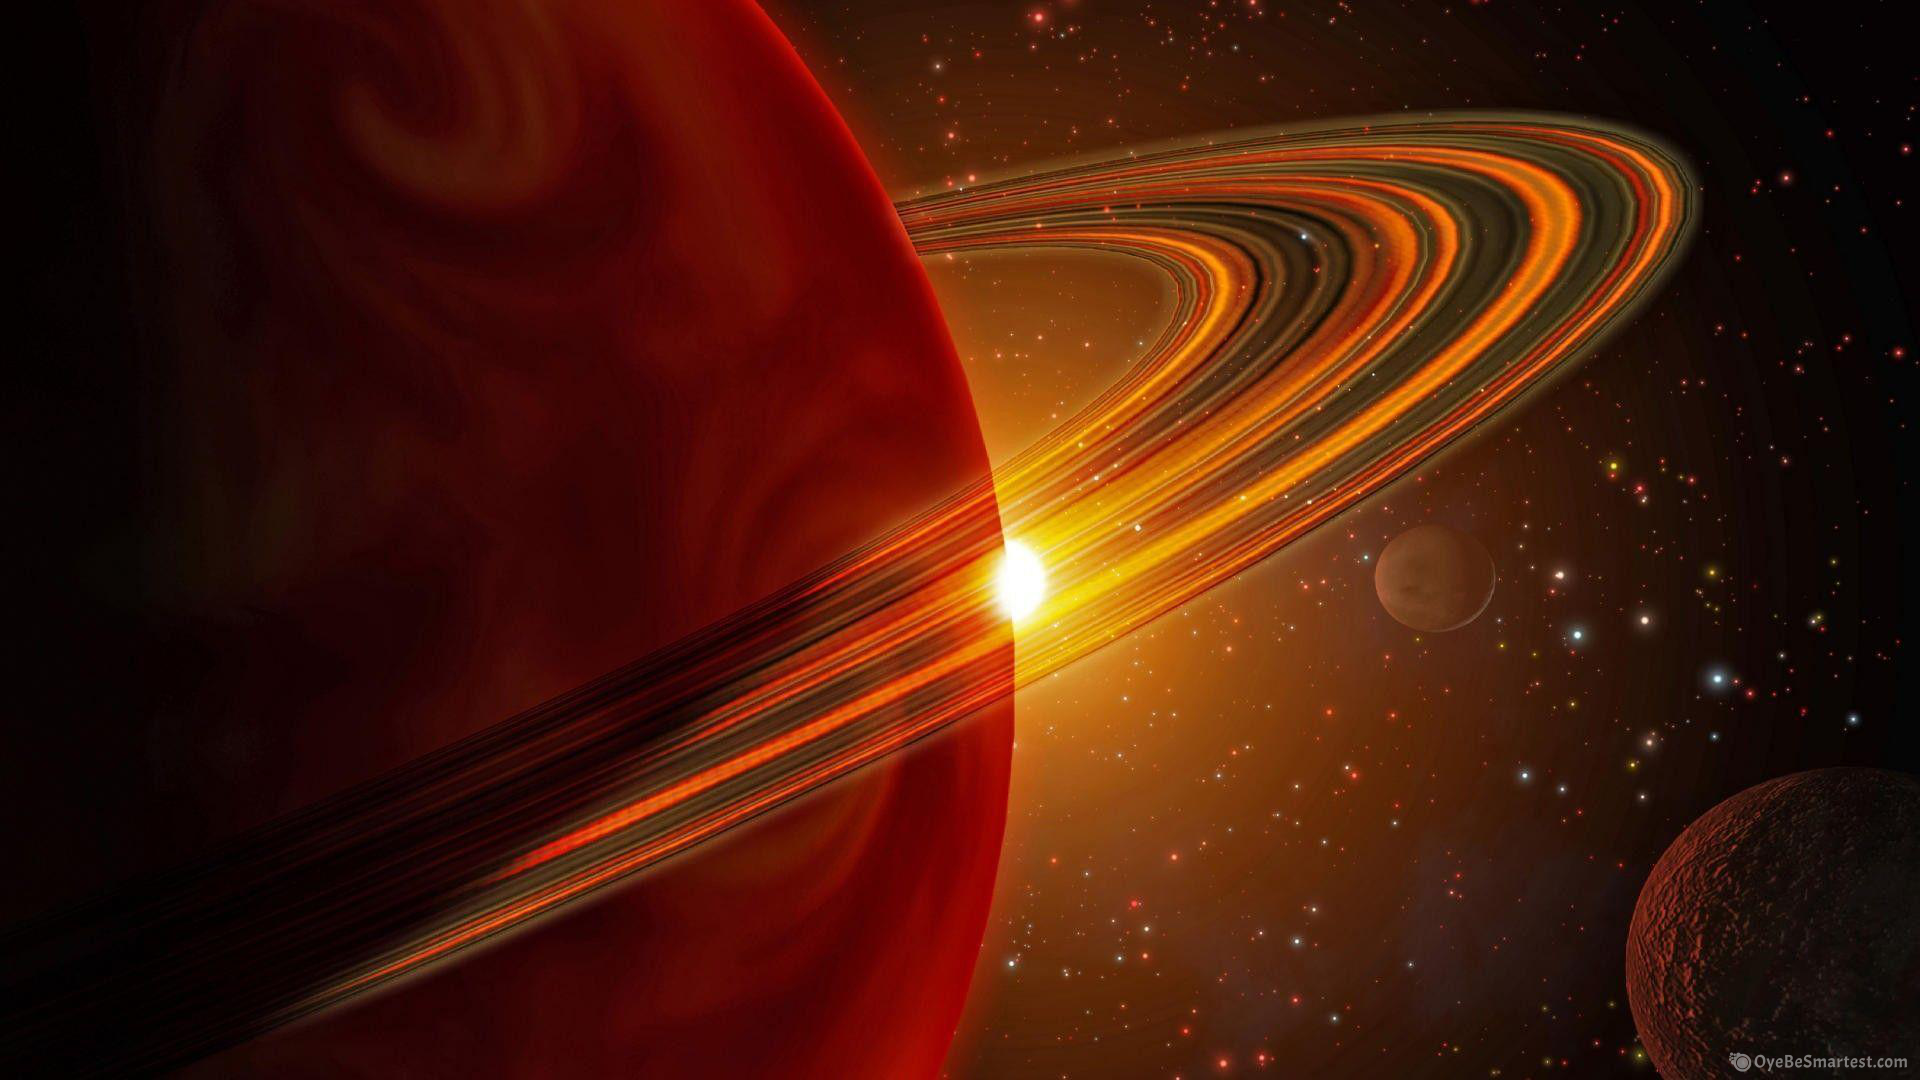 Result of Saturn Hd Wallpapers • Wallpapers Images PNGs Graphics